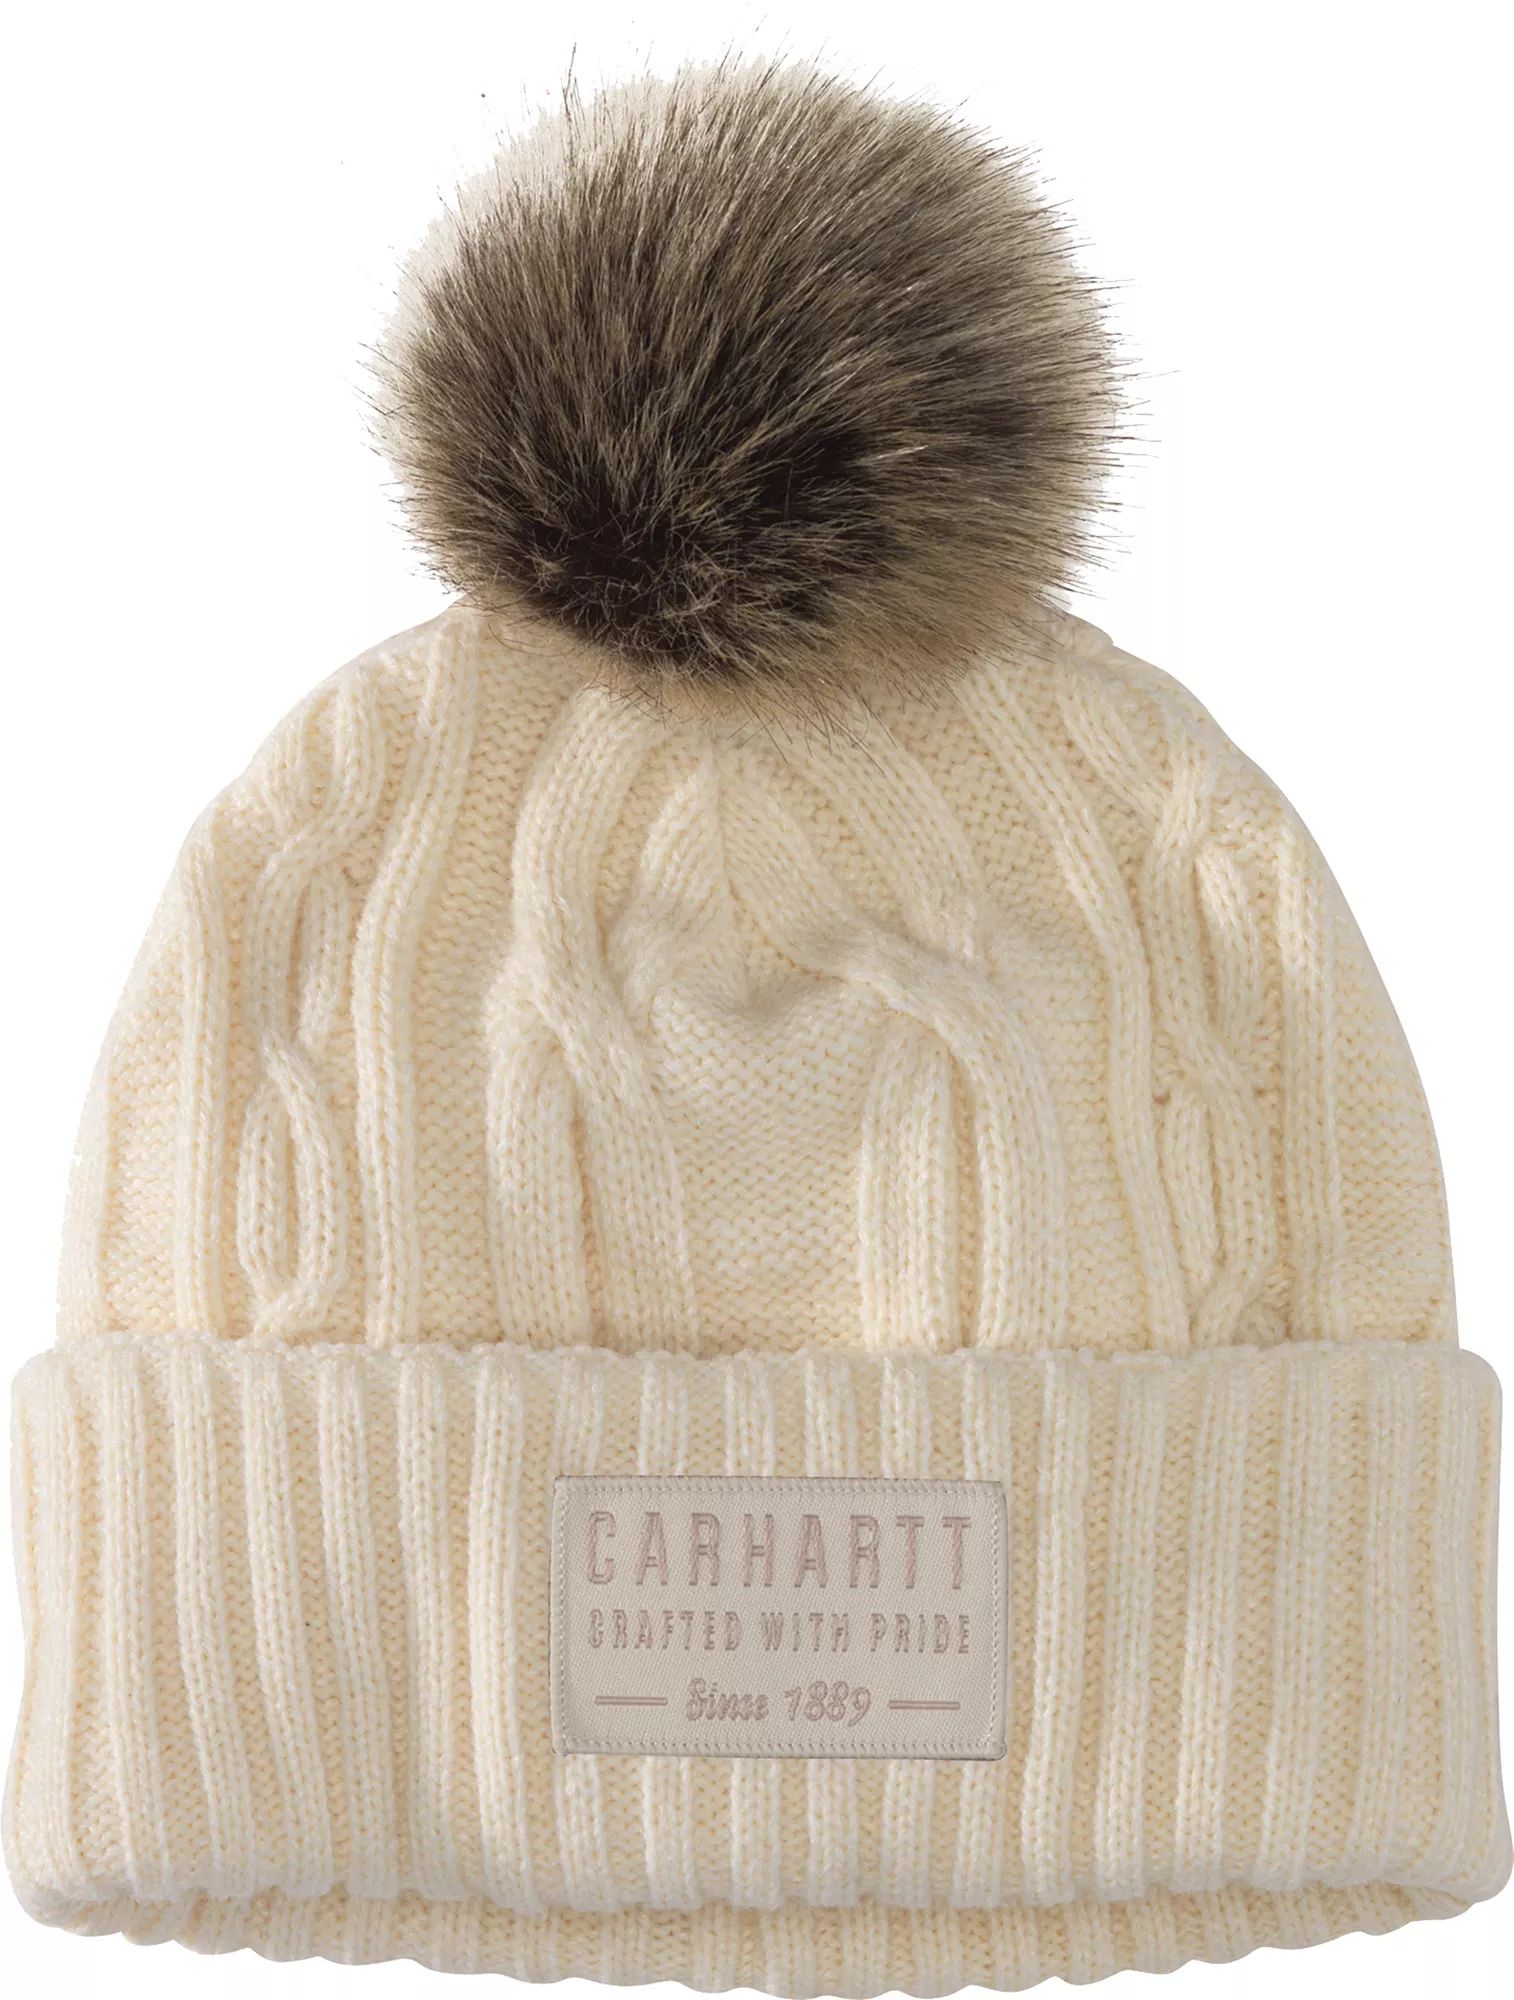 Carhartt Women's Cable Knit Pom Beanie, Winter White | Dick's Sporting Goods